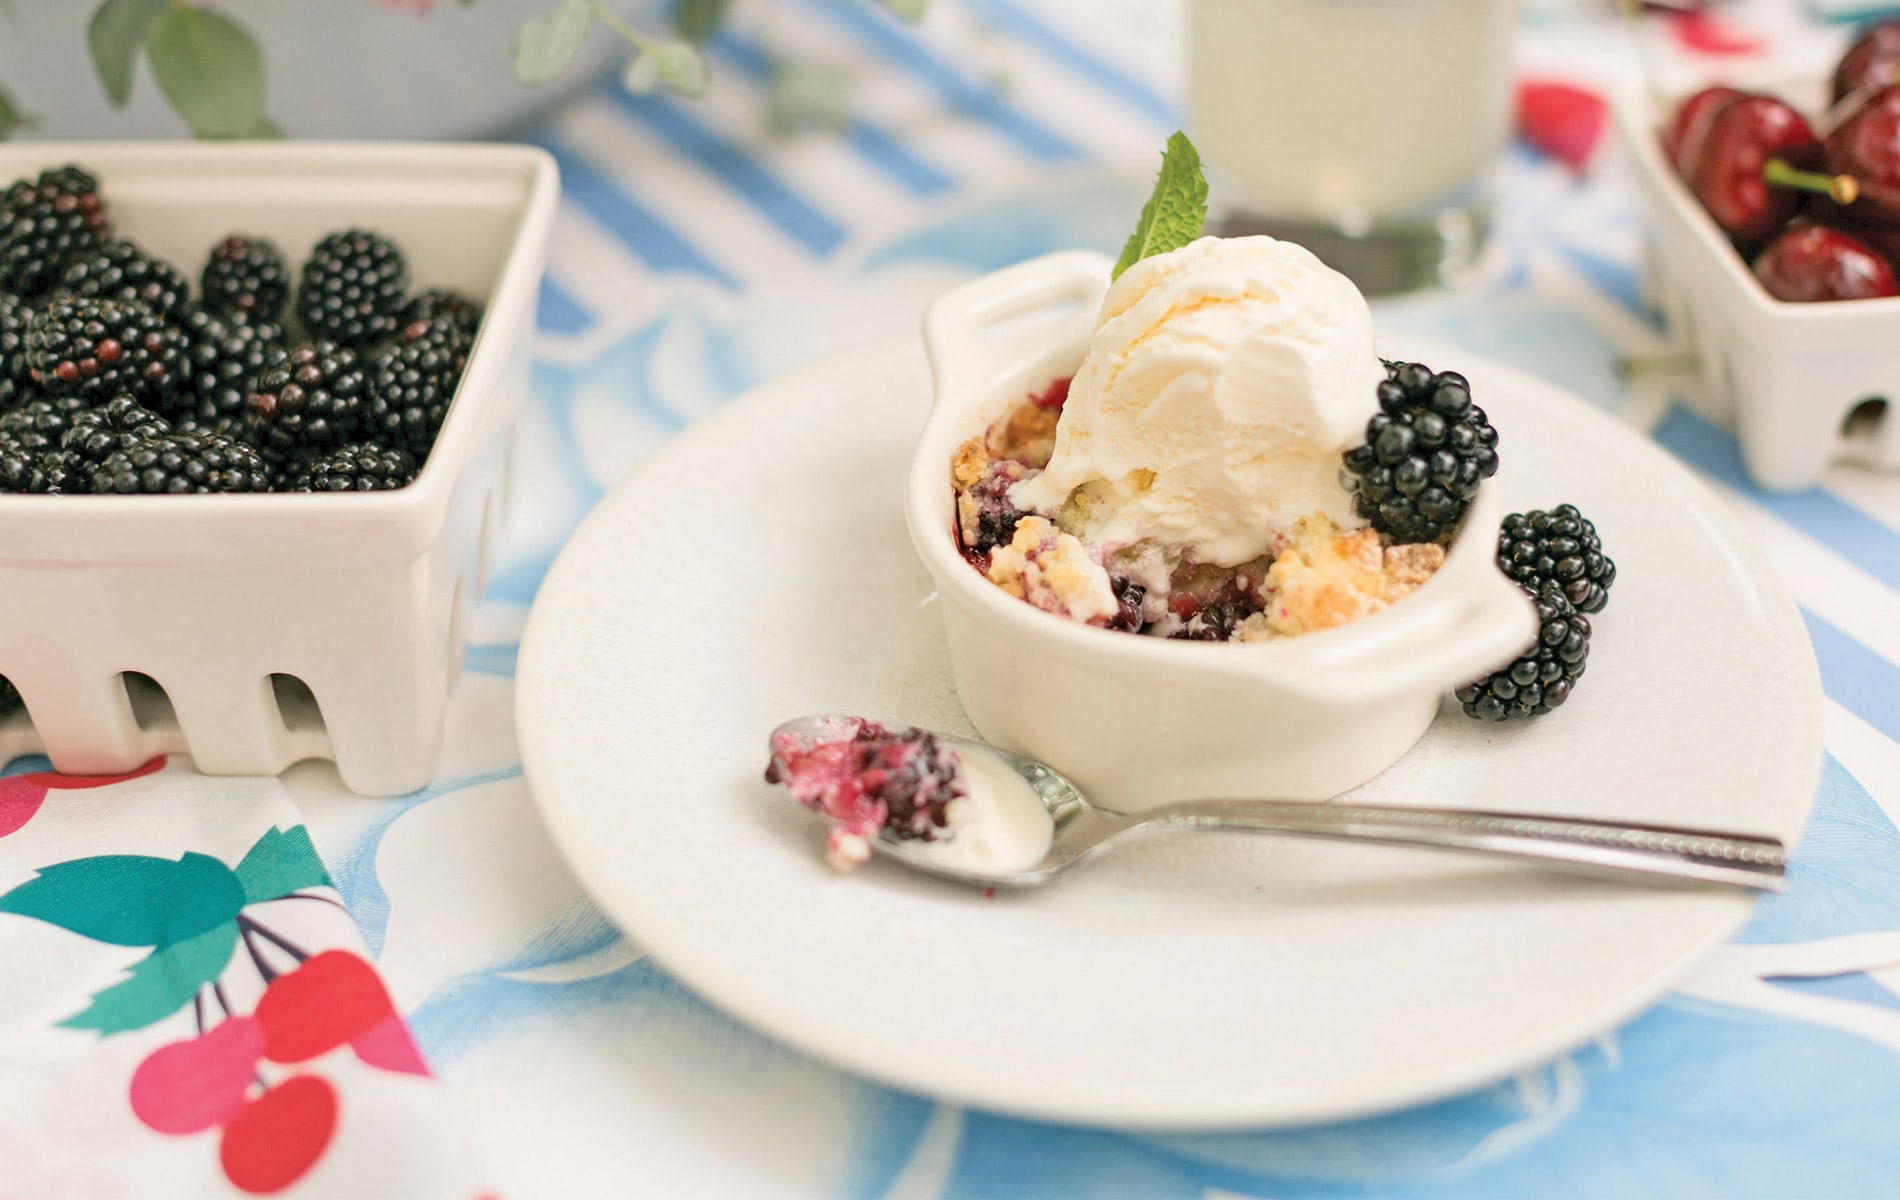 Elisabeth's black berry cobbler with vanilla ice cream topped with fresh black berries